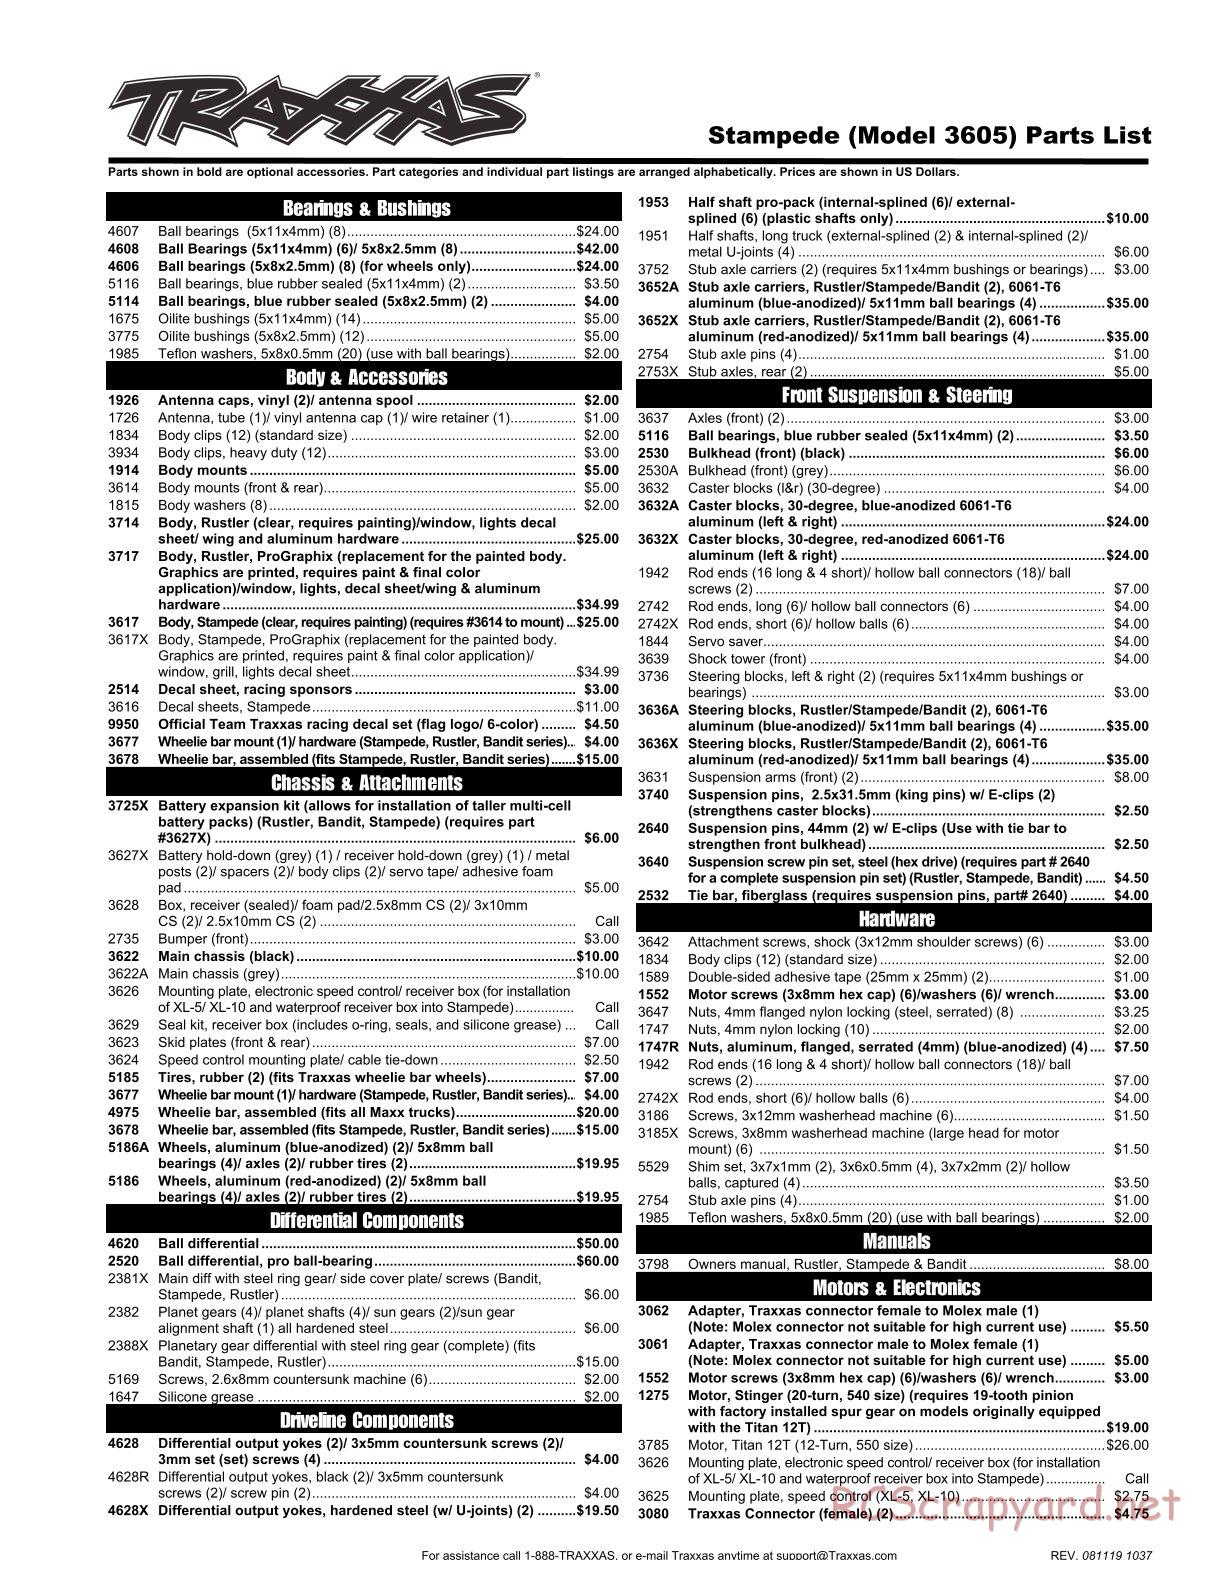 Traxxas - Stampede XL-5 - Parts List - Page 1